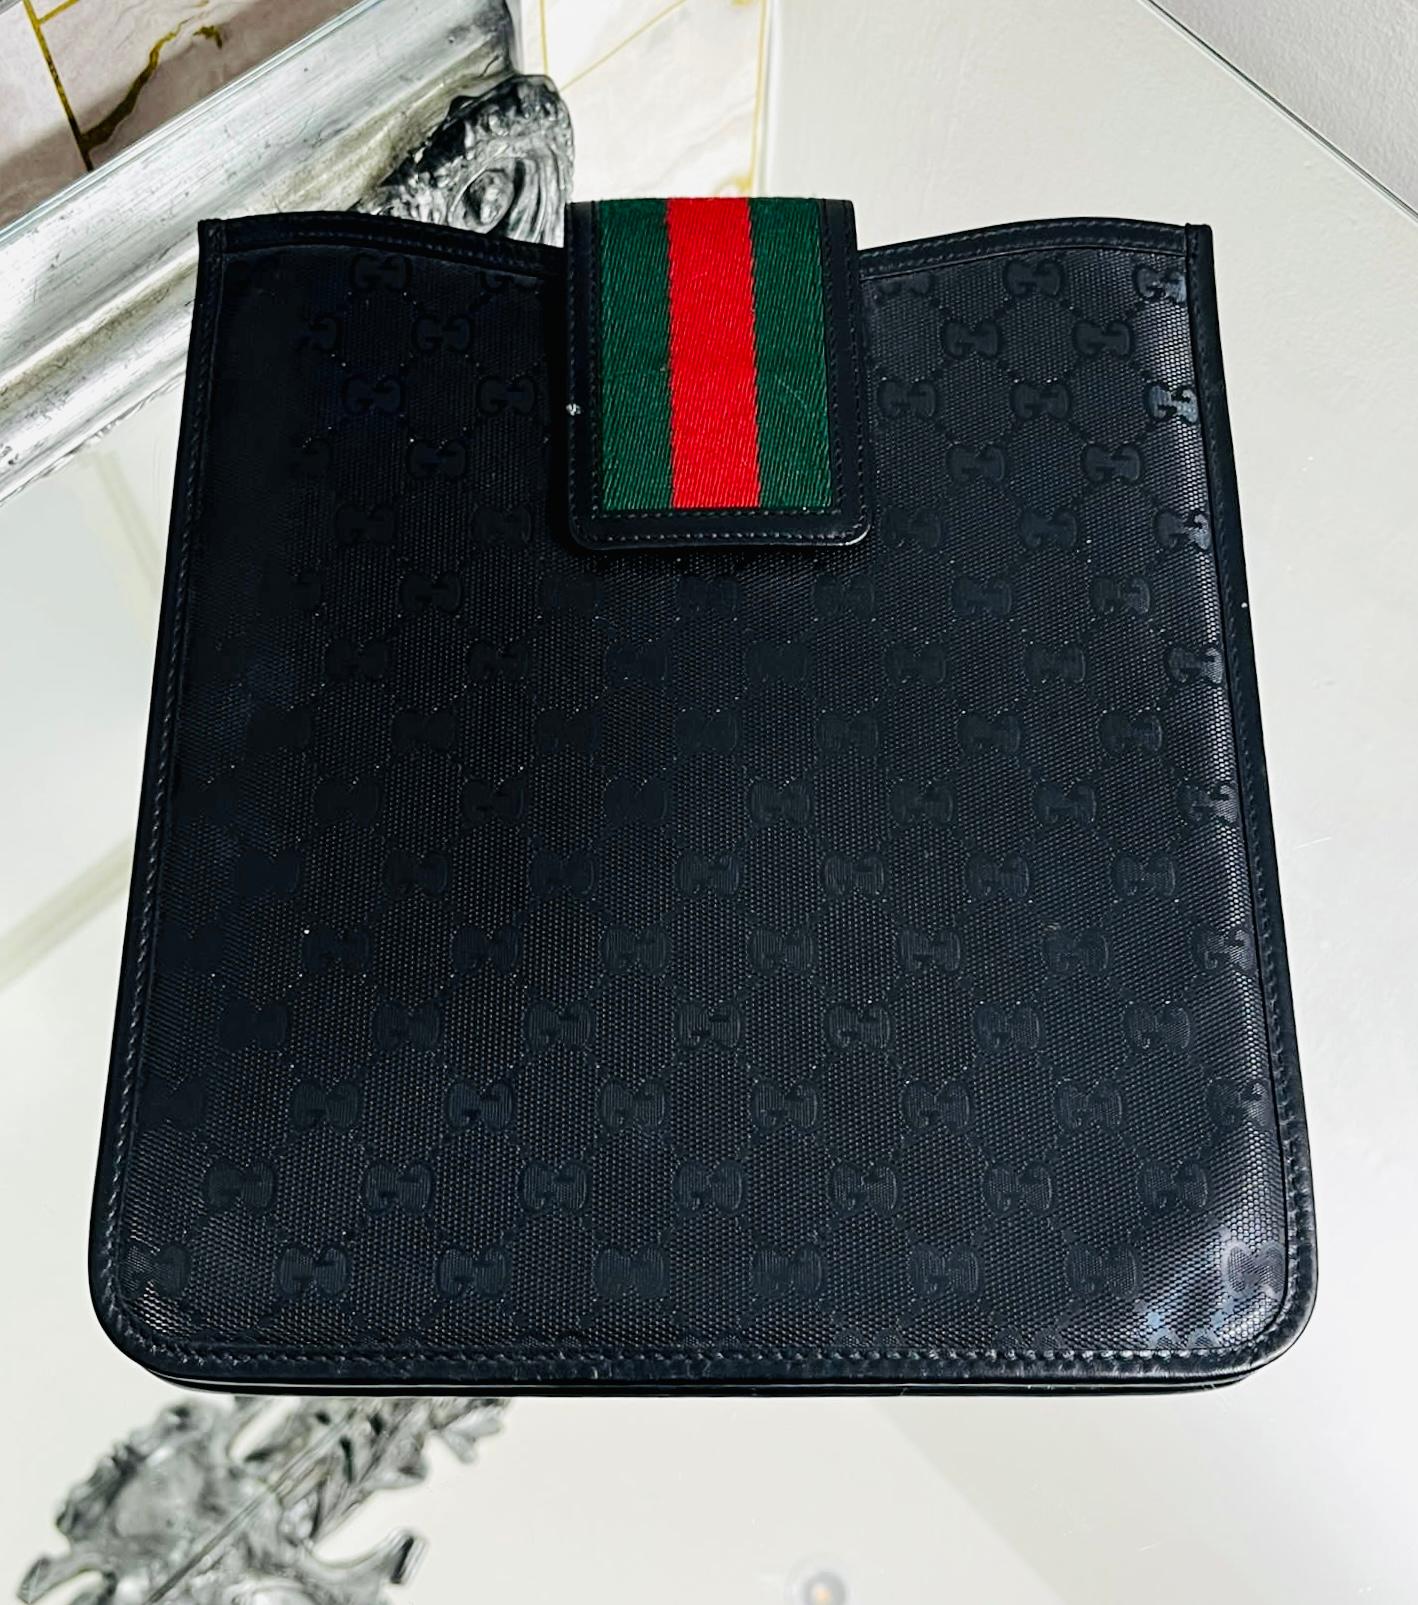 Gucci Guccissima Leather iPad Case

Black case designed with iconic 'GG' logo monogram.

Detailed with the brand's signature green & red Velcro strap closure.

Size – Height 26cm, Width 24cm, Depth 1cm

Condition – Very Good

Composition –